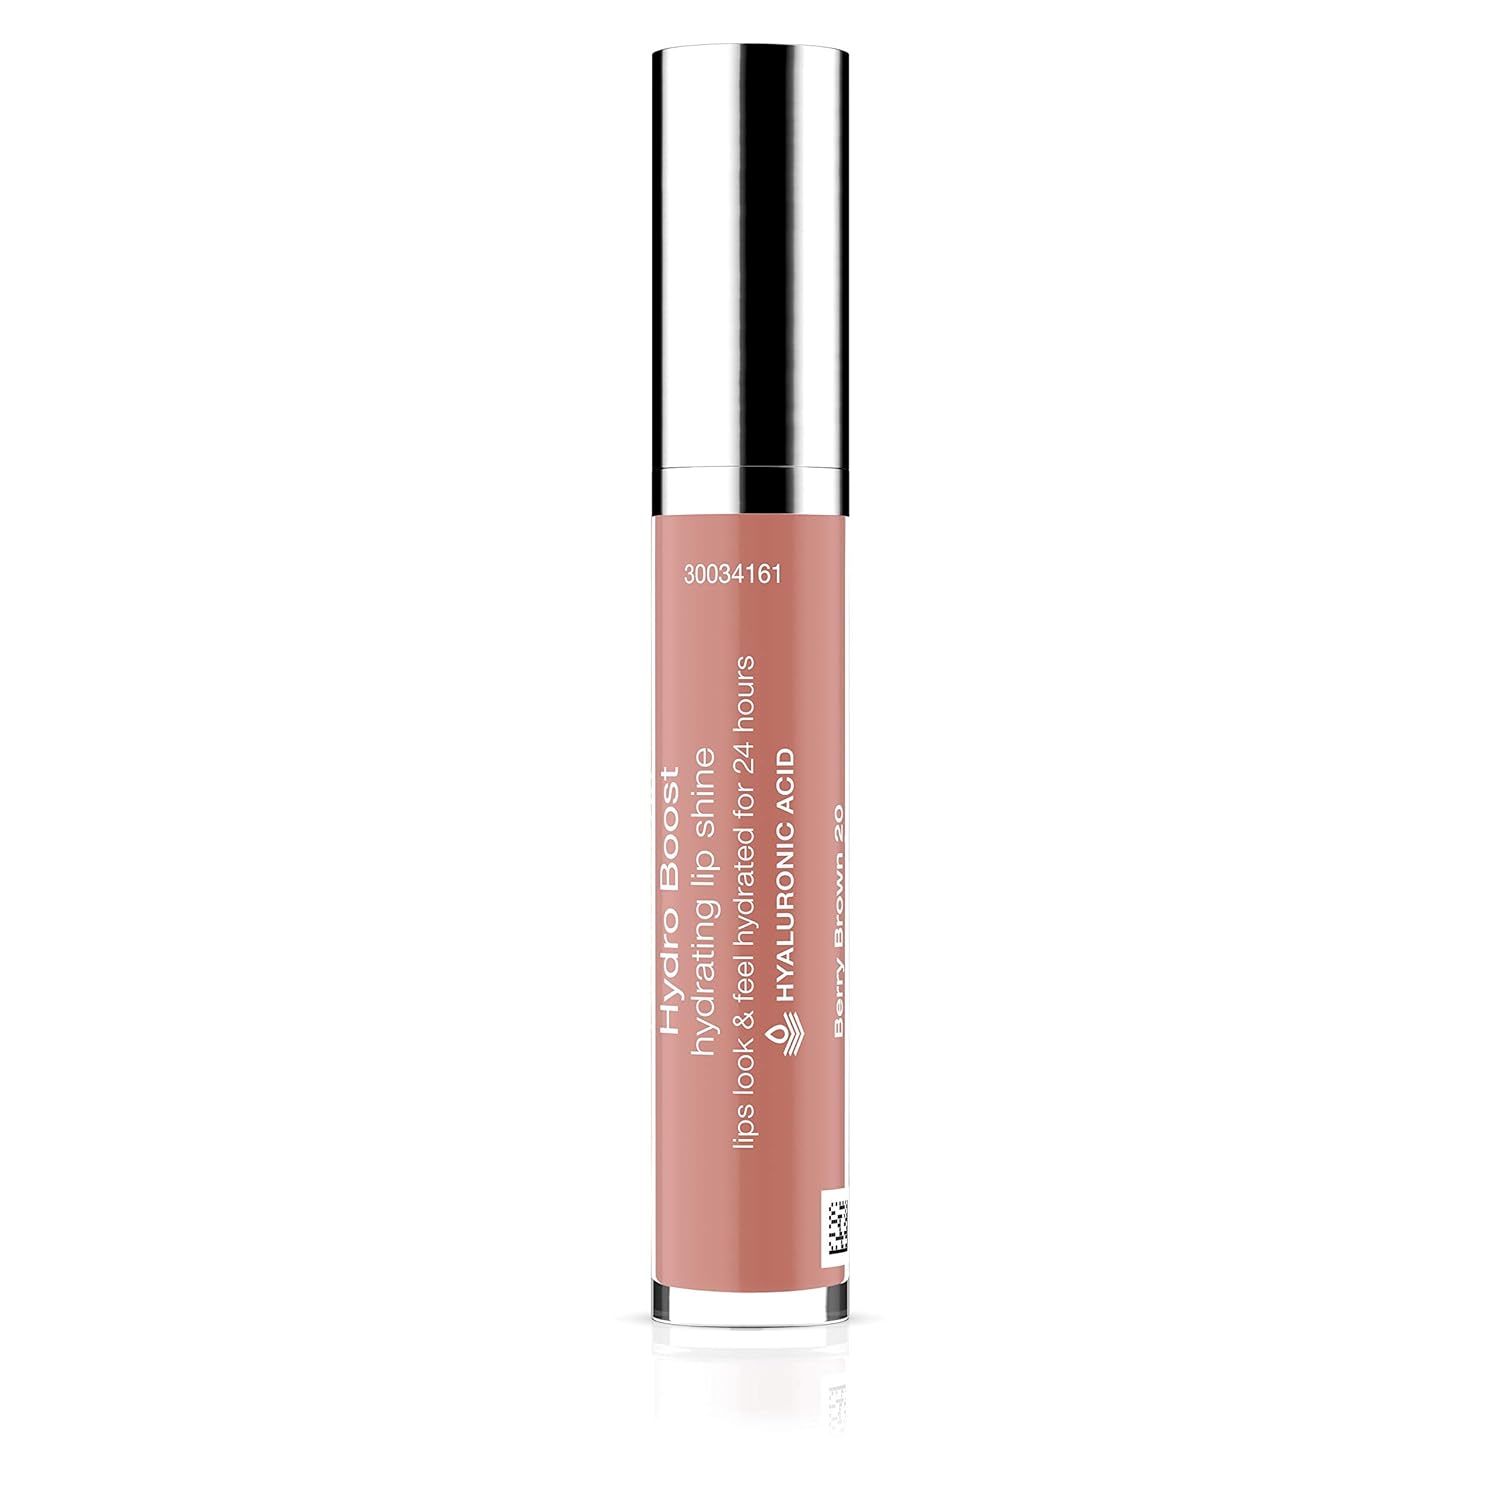 Neutrogena Hydro Boost Moisturizing Lip Gloss, Hydrating Non-Stick and Non-Drying Luminous Tinted Lip Shine with Hyaluronic Acid to Soften and Condition Lips, 20 Berry Brown, 0.10 oz : Beauty & Personal Care